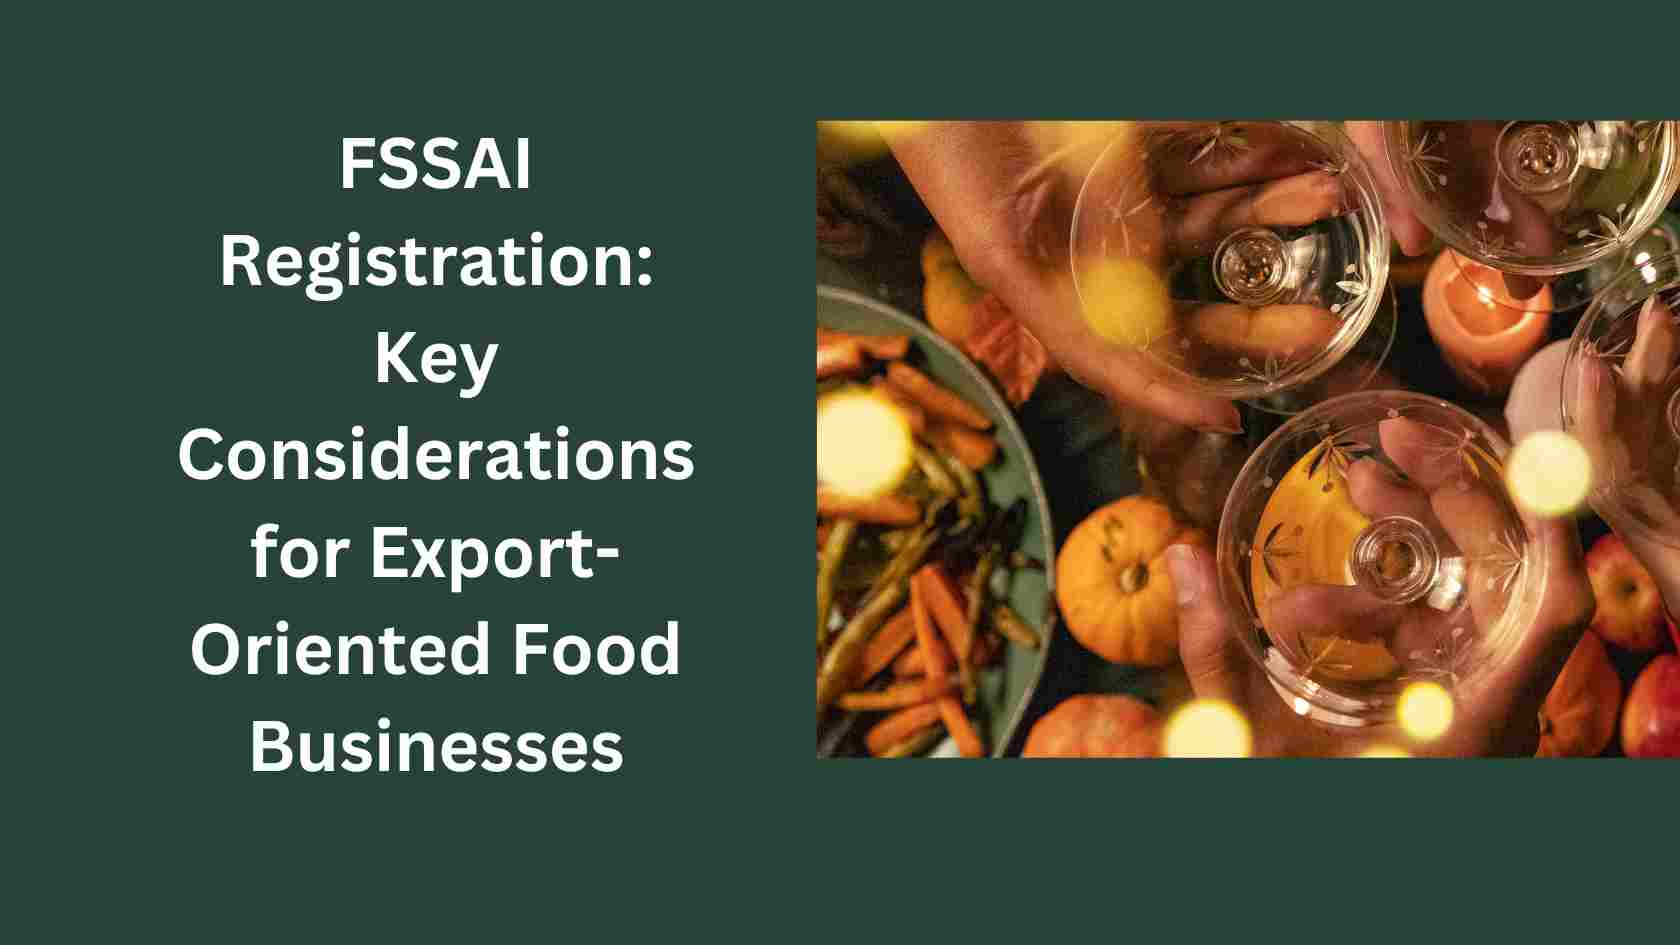 FSSAI Registration Key Considerations for Export-Oriented Food Businesses